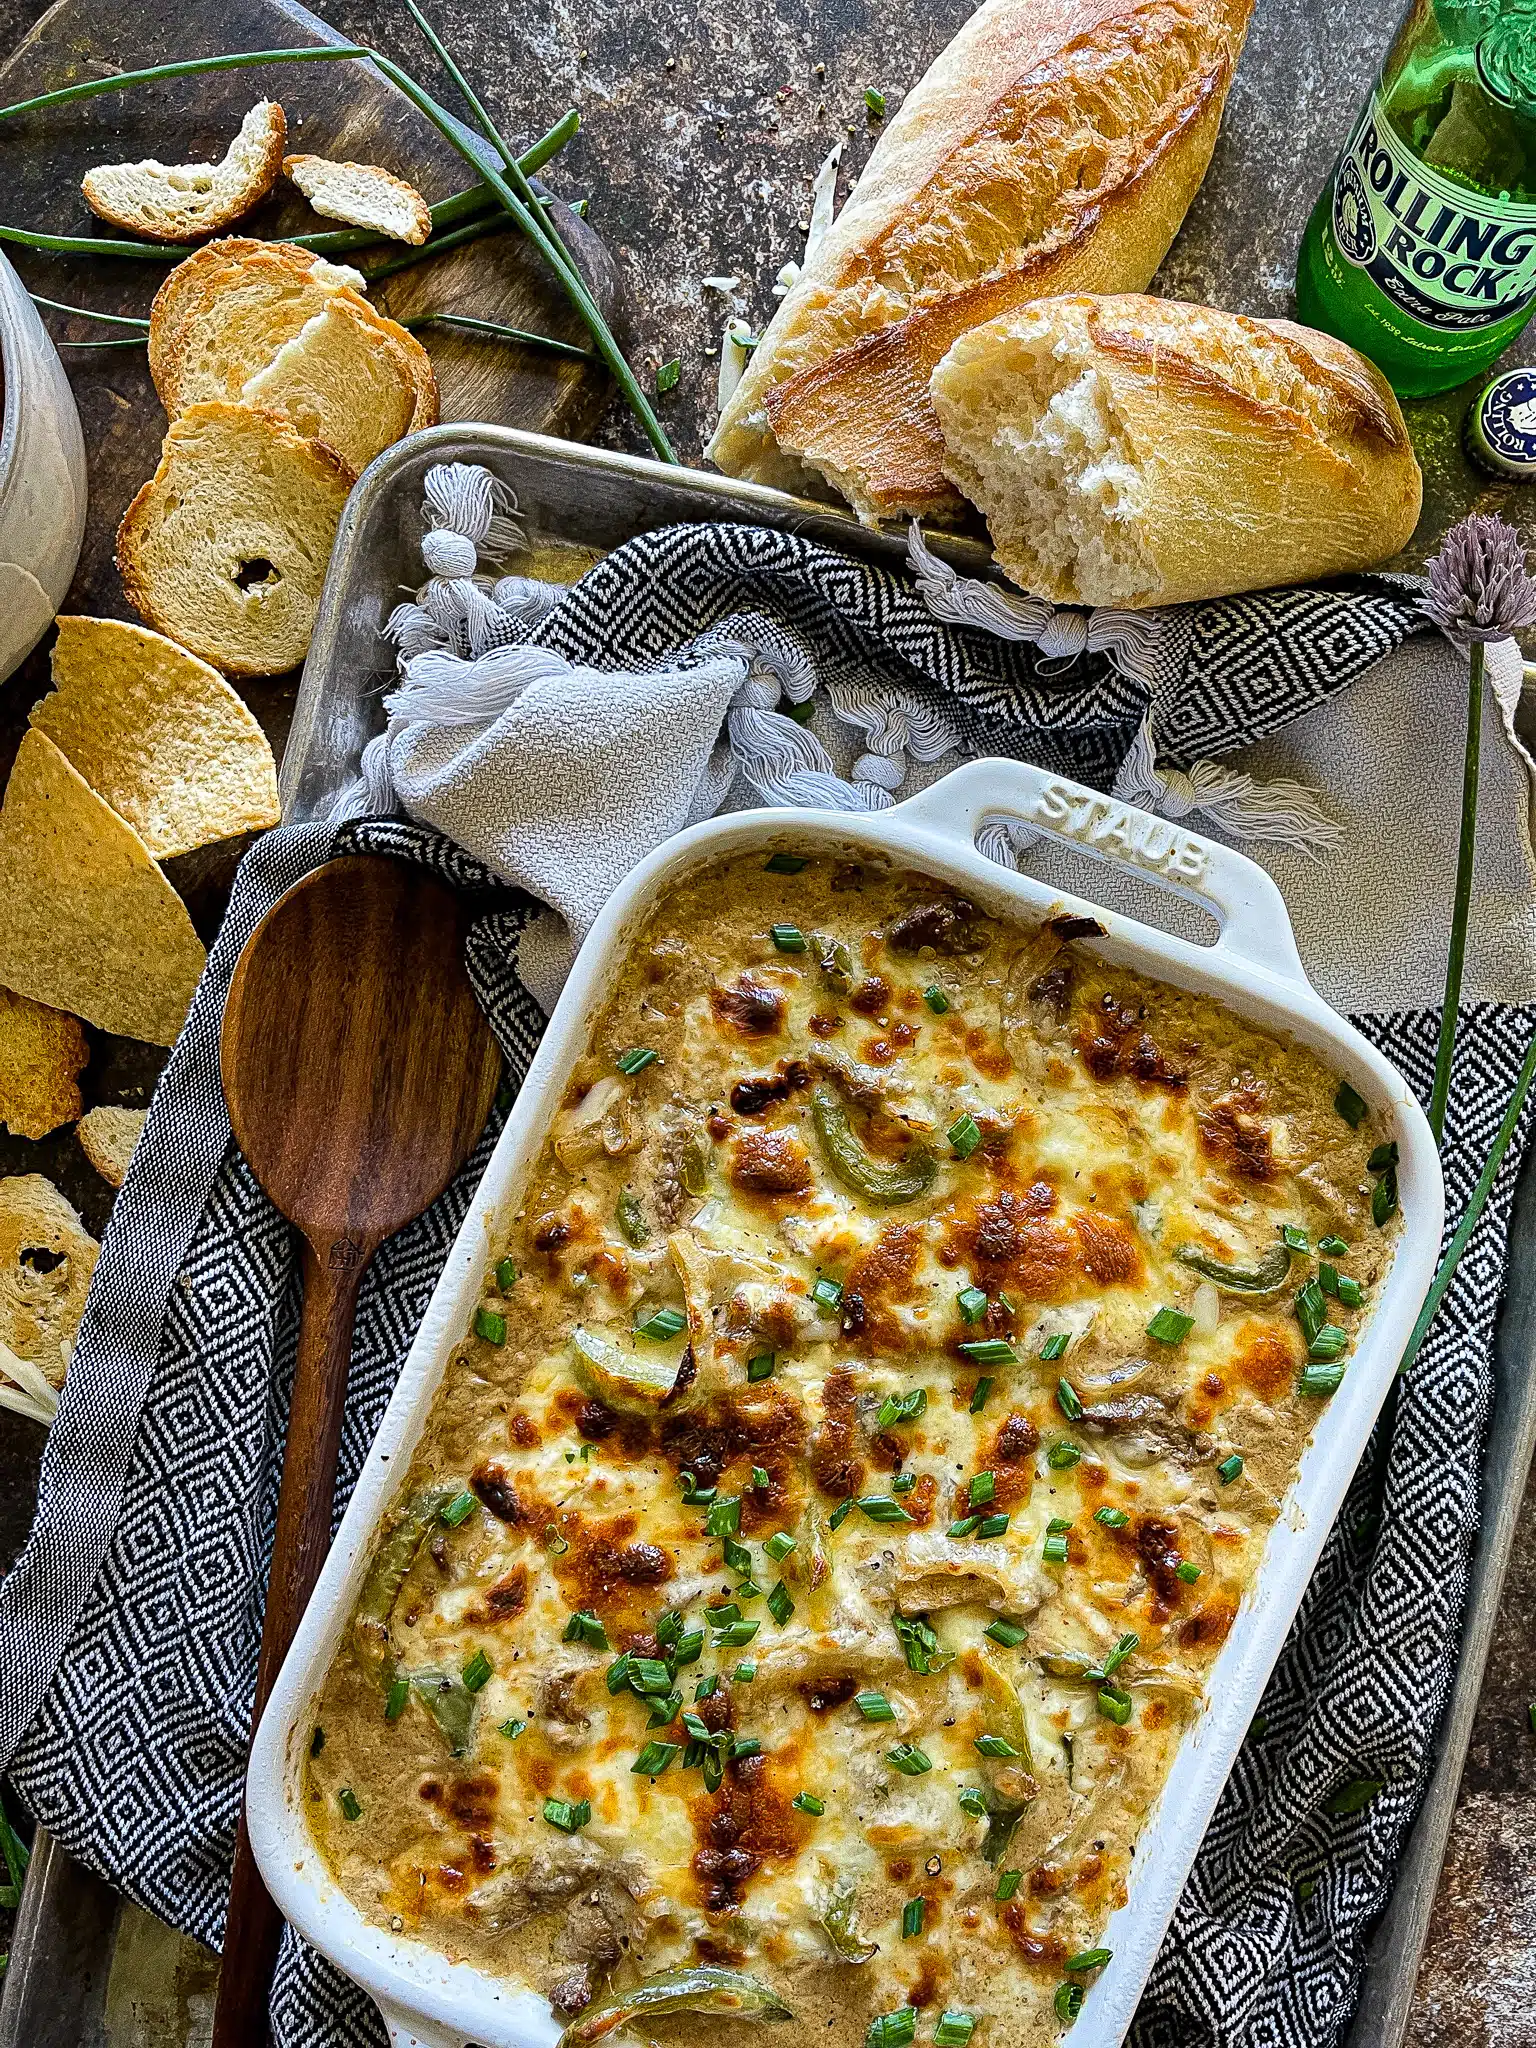 philly cheesesteak dip in a baking dish and garnished with chips and crusty bread for dipping